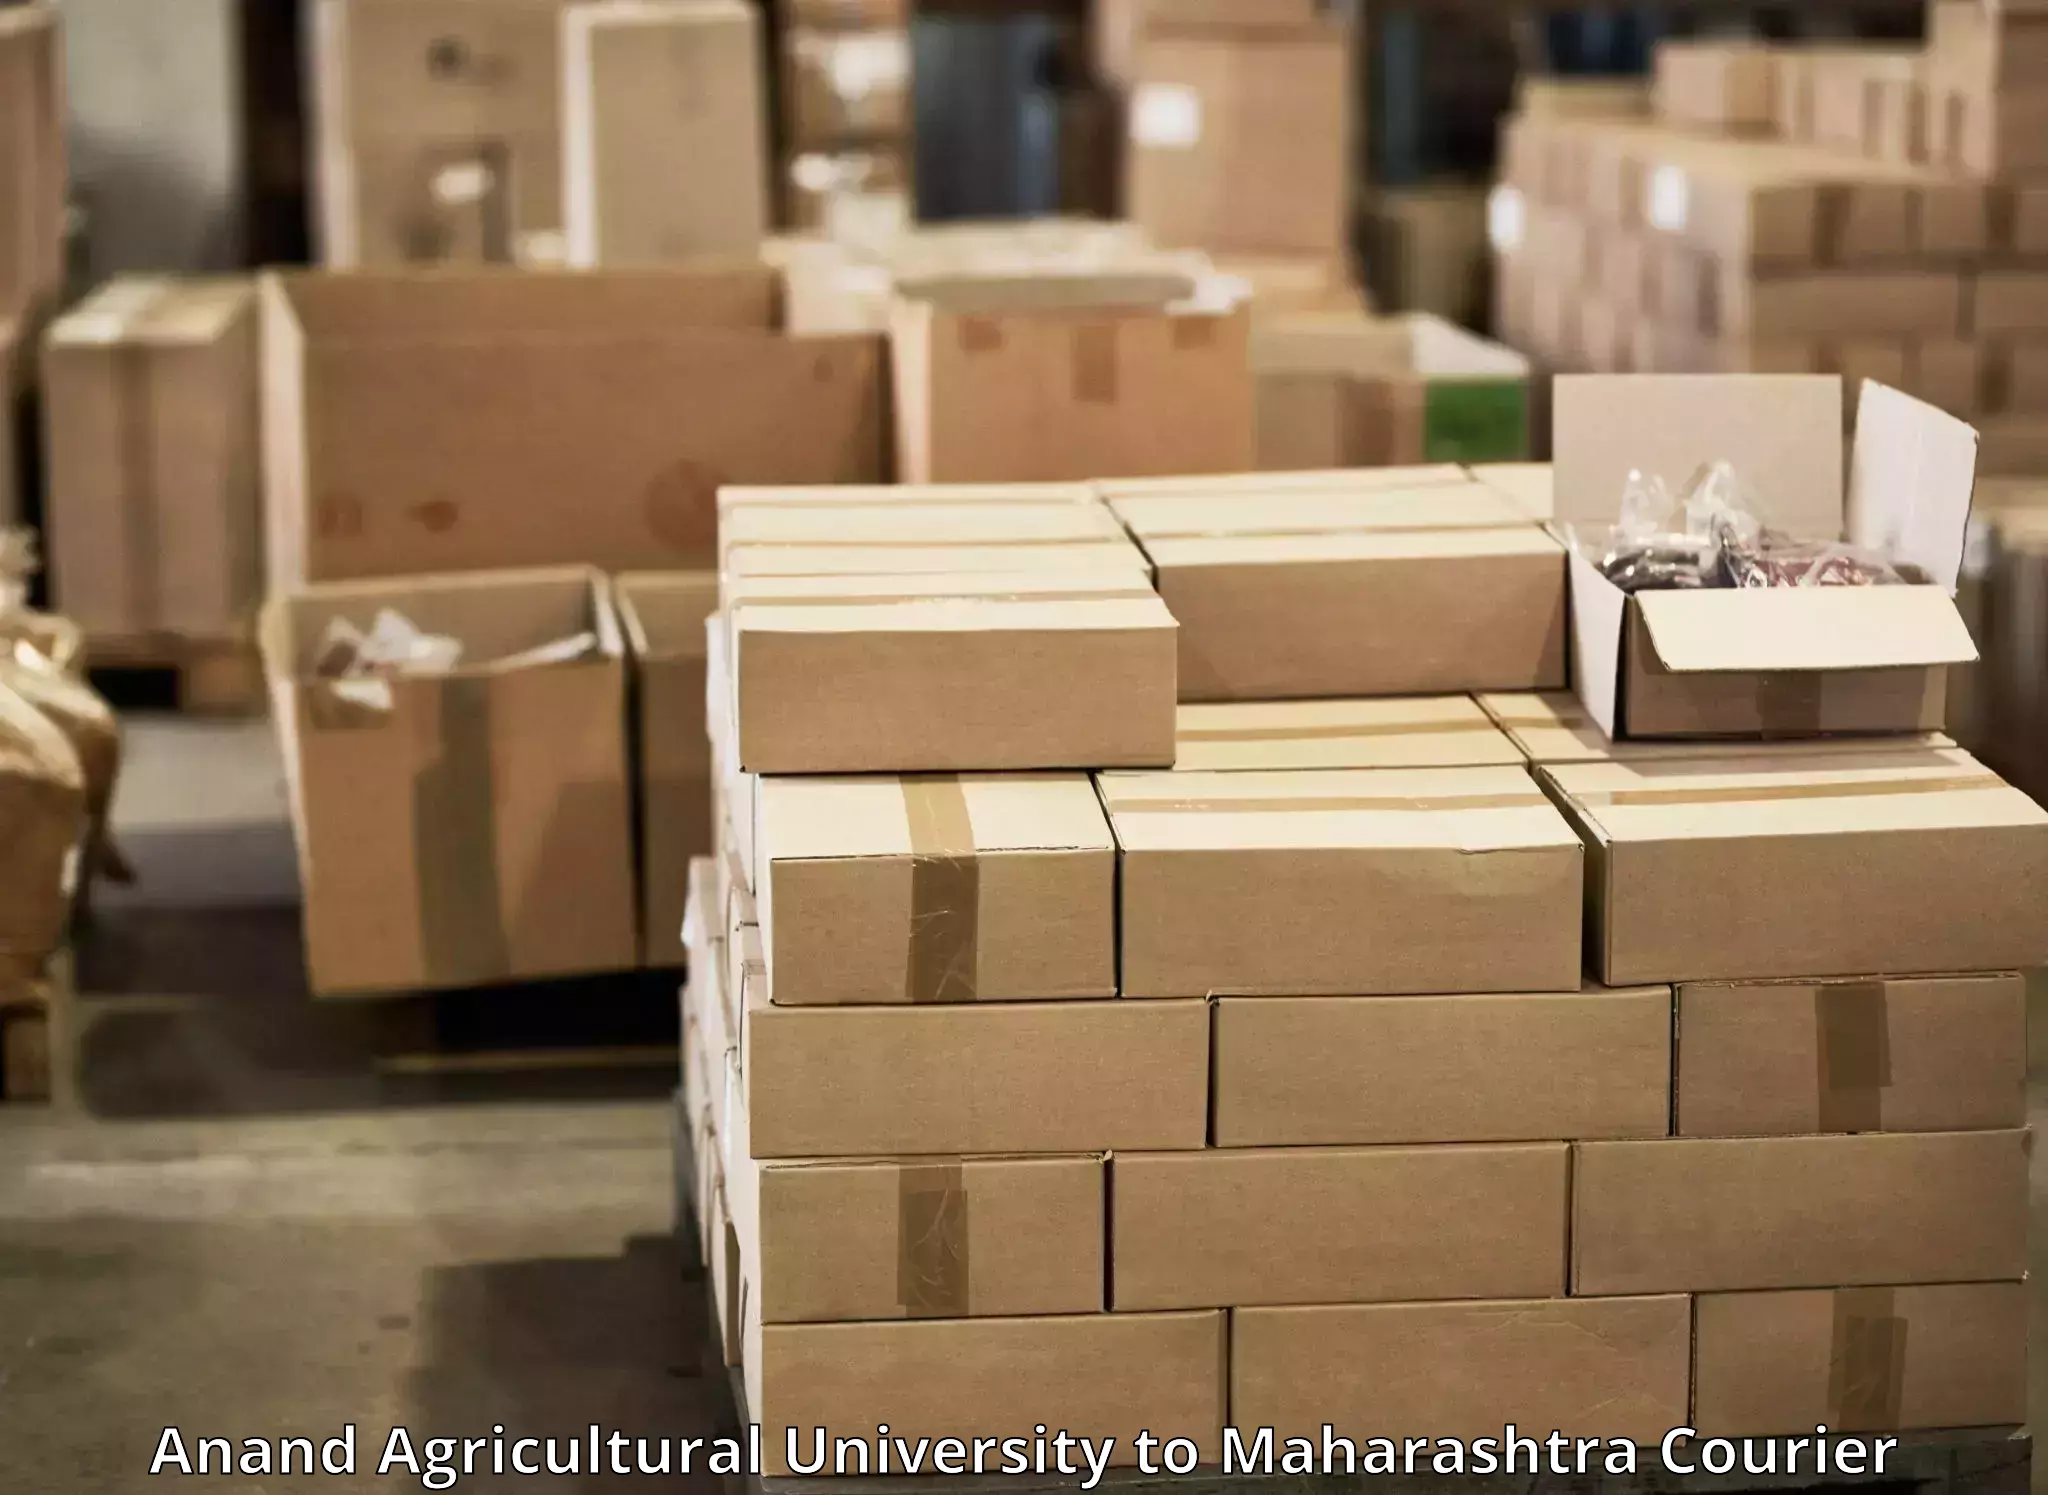 Return courier service Anand Agricultural University to Maharashtra